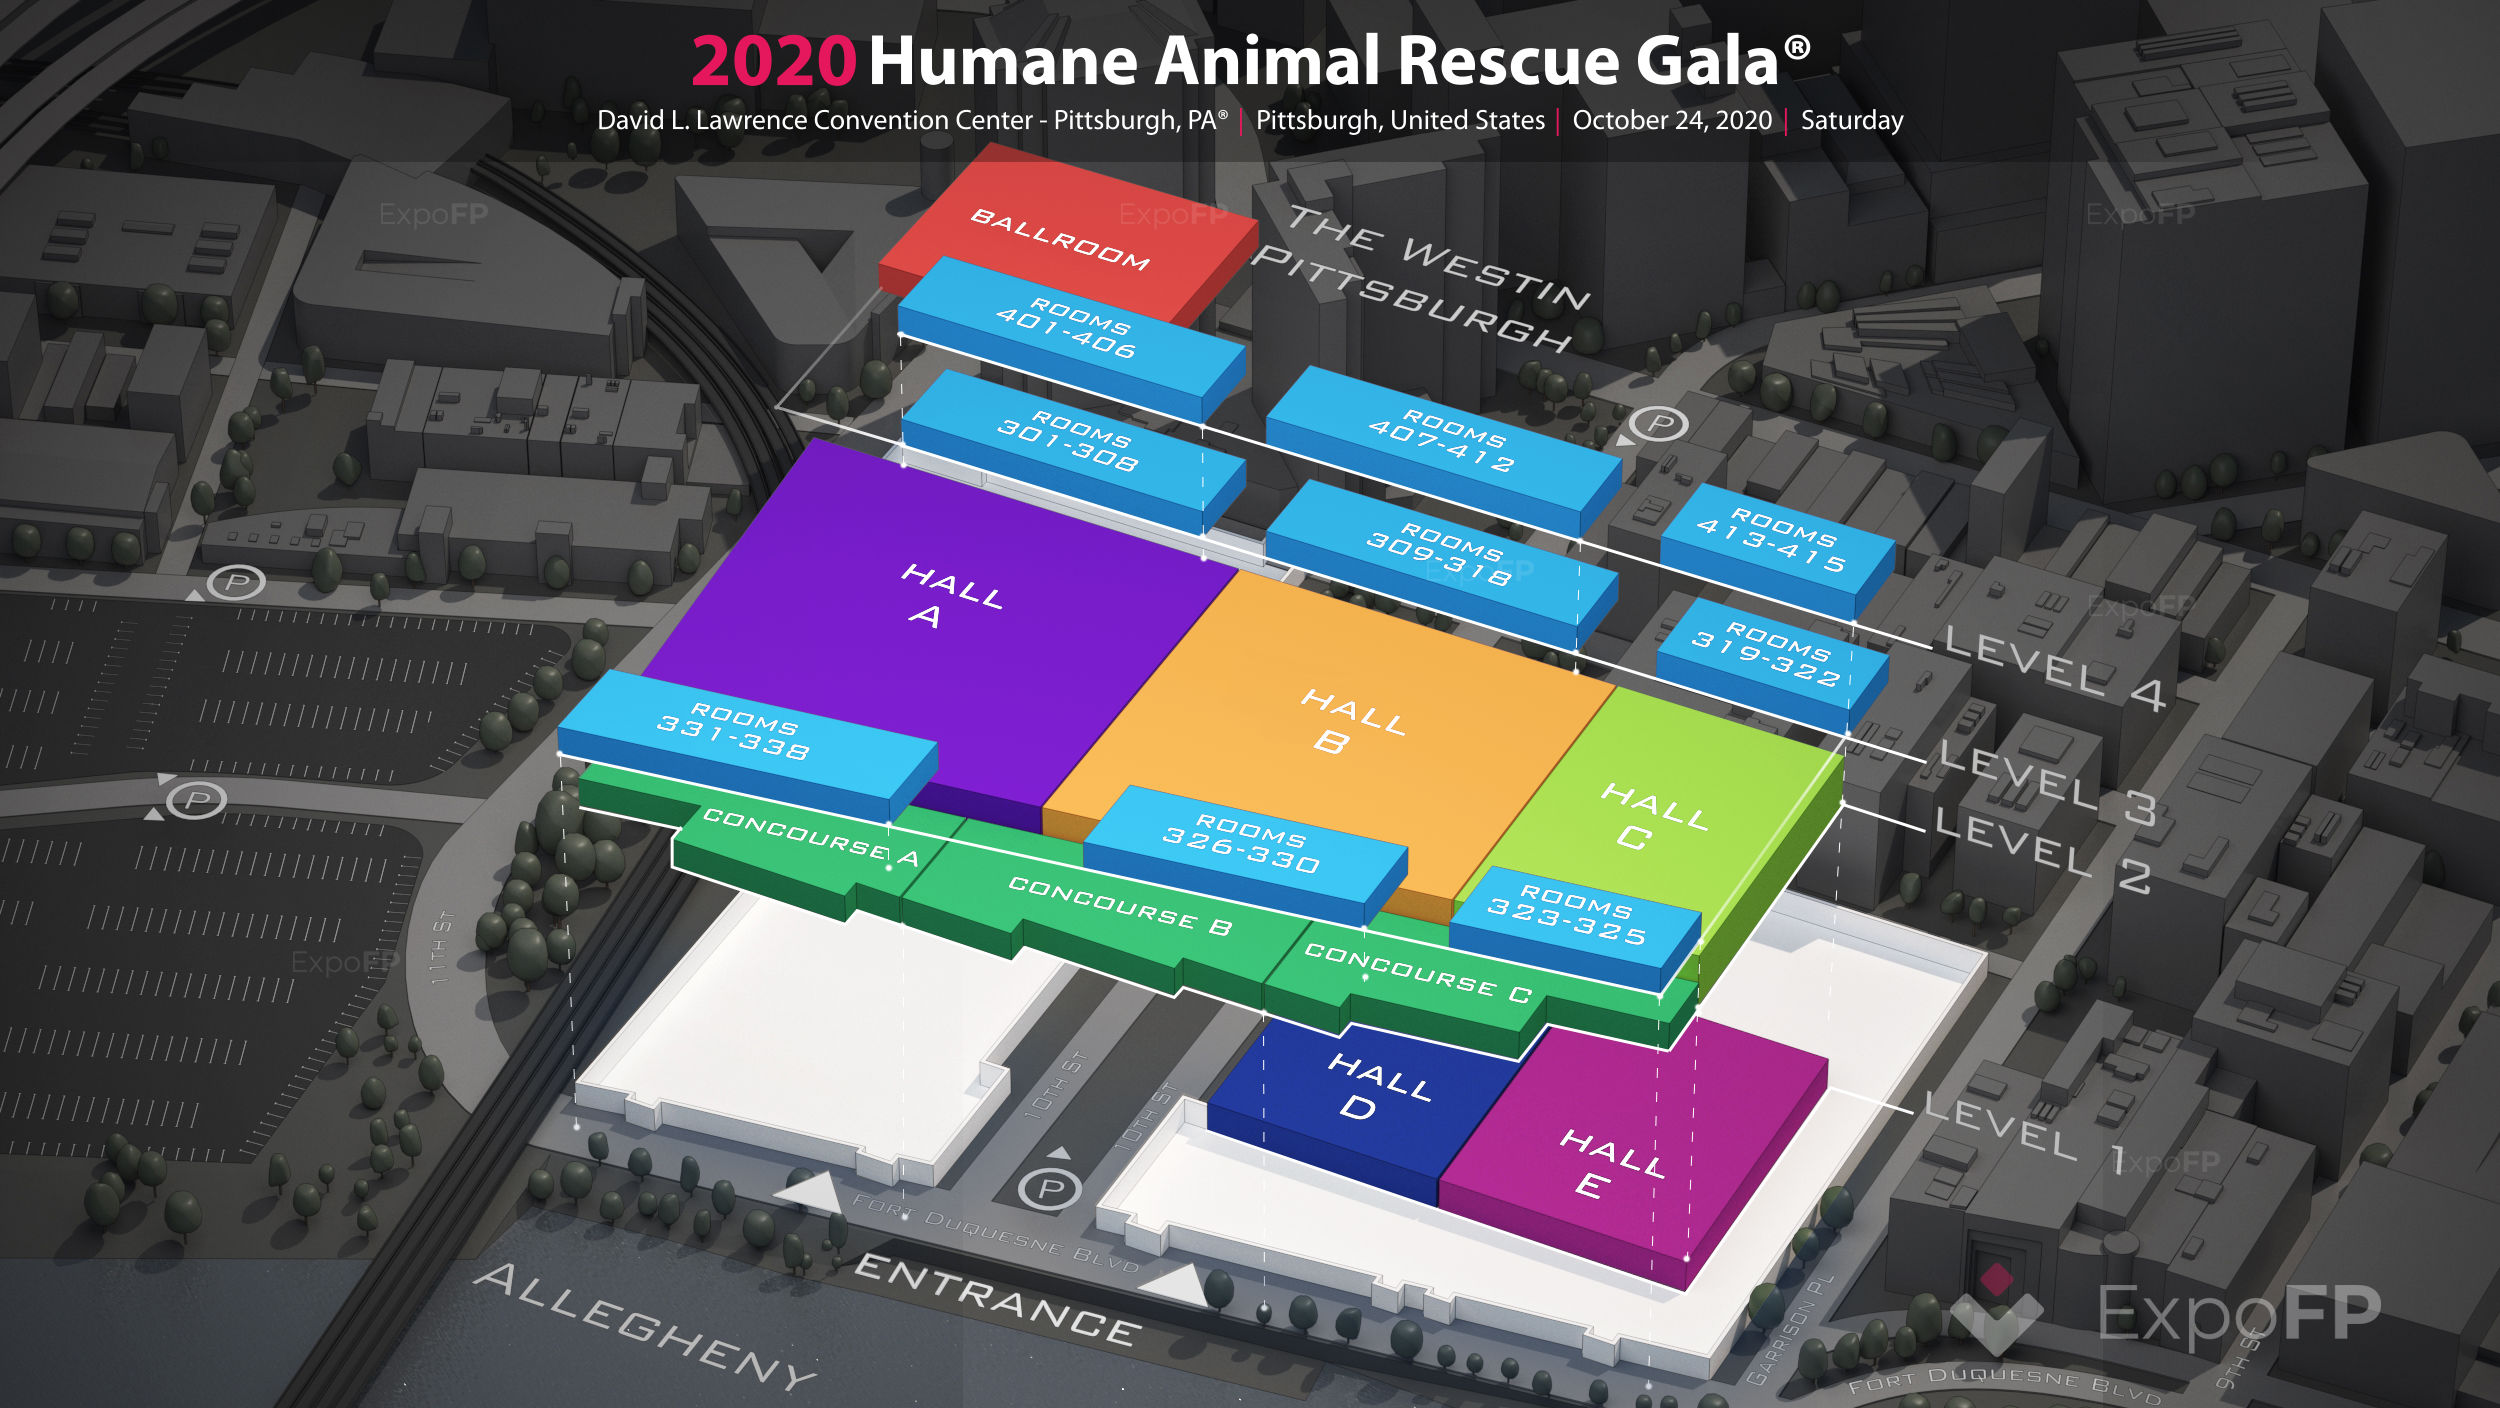 Humane Animal Rescue Gala 2020 in David L. Lawrence Convention Center -  Pittsburgh, PA